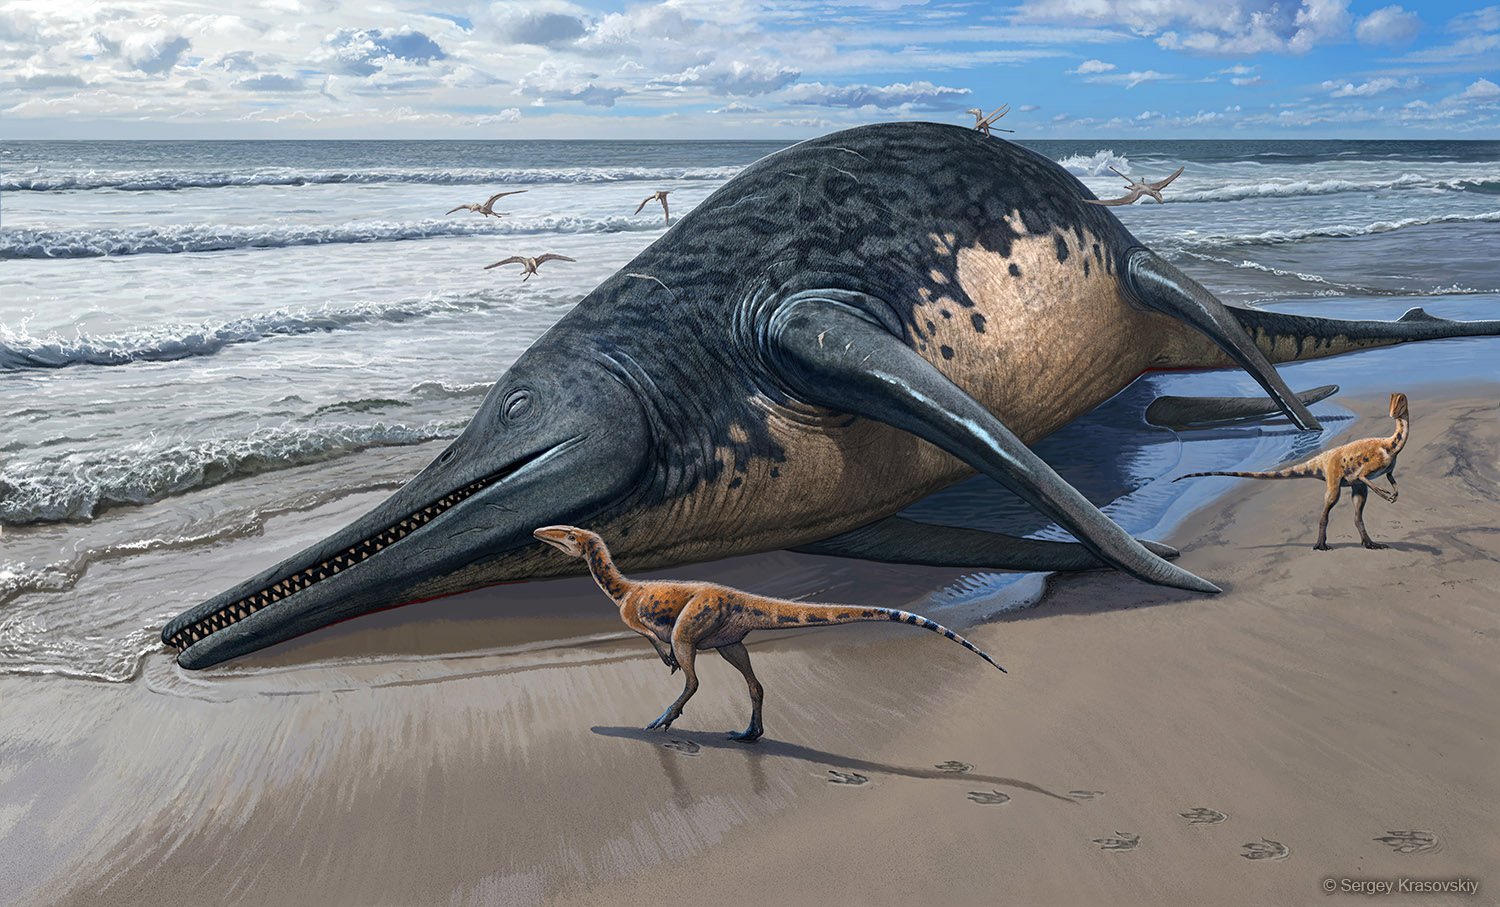 Giant Ichthyosaur Fossil Unearthed in UK, Rewrites Marine History